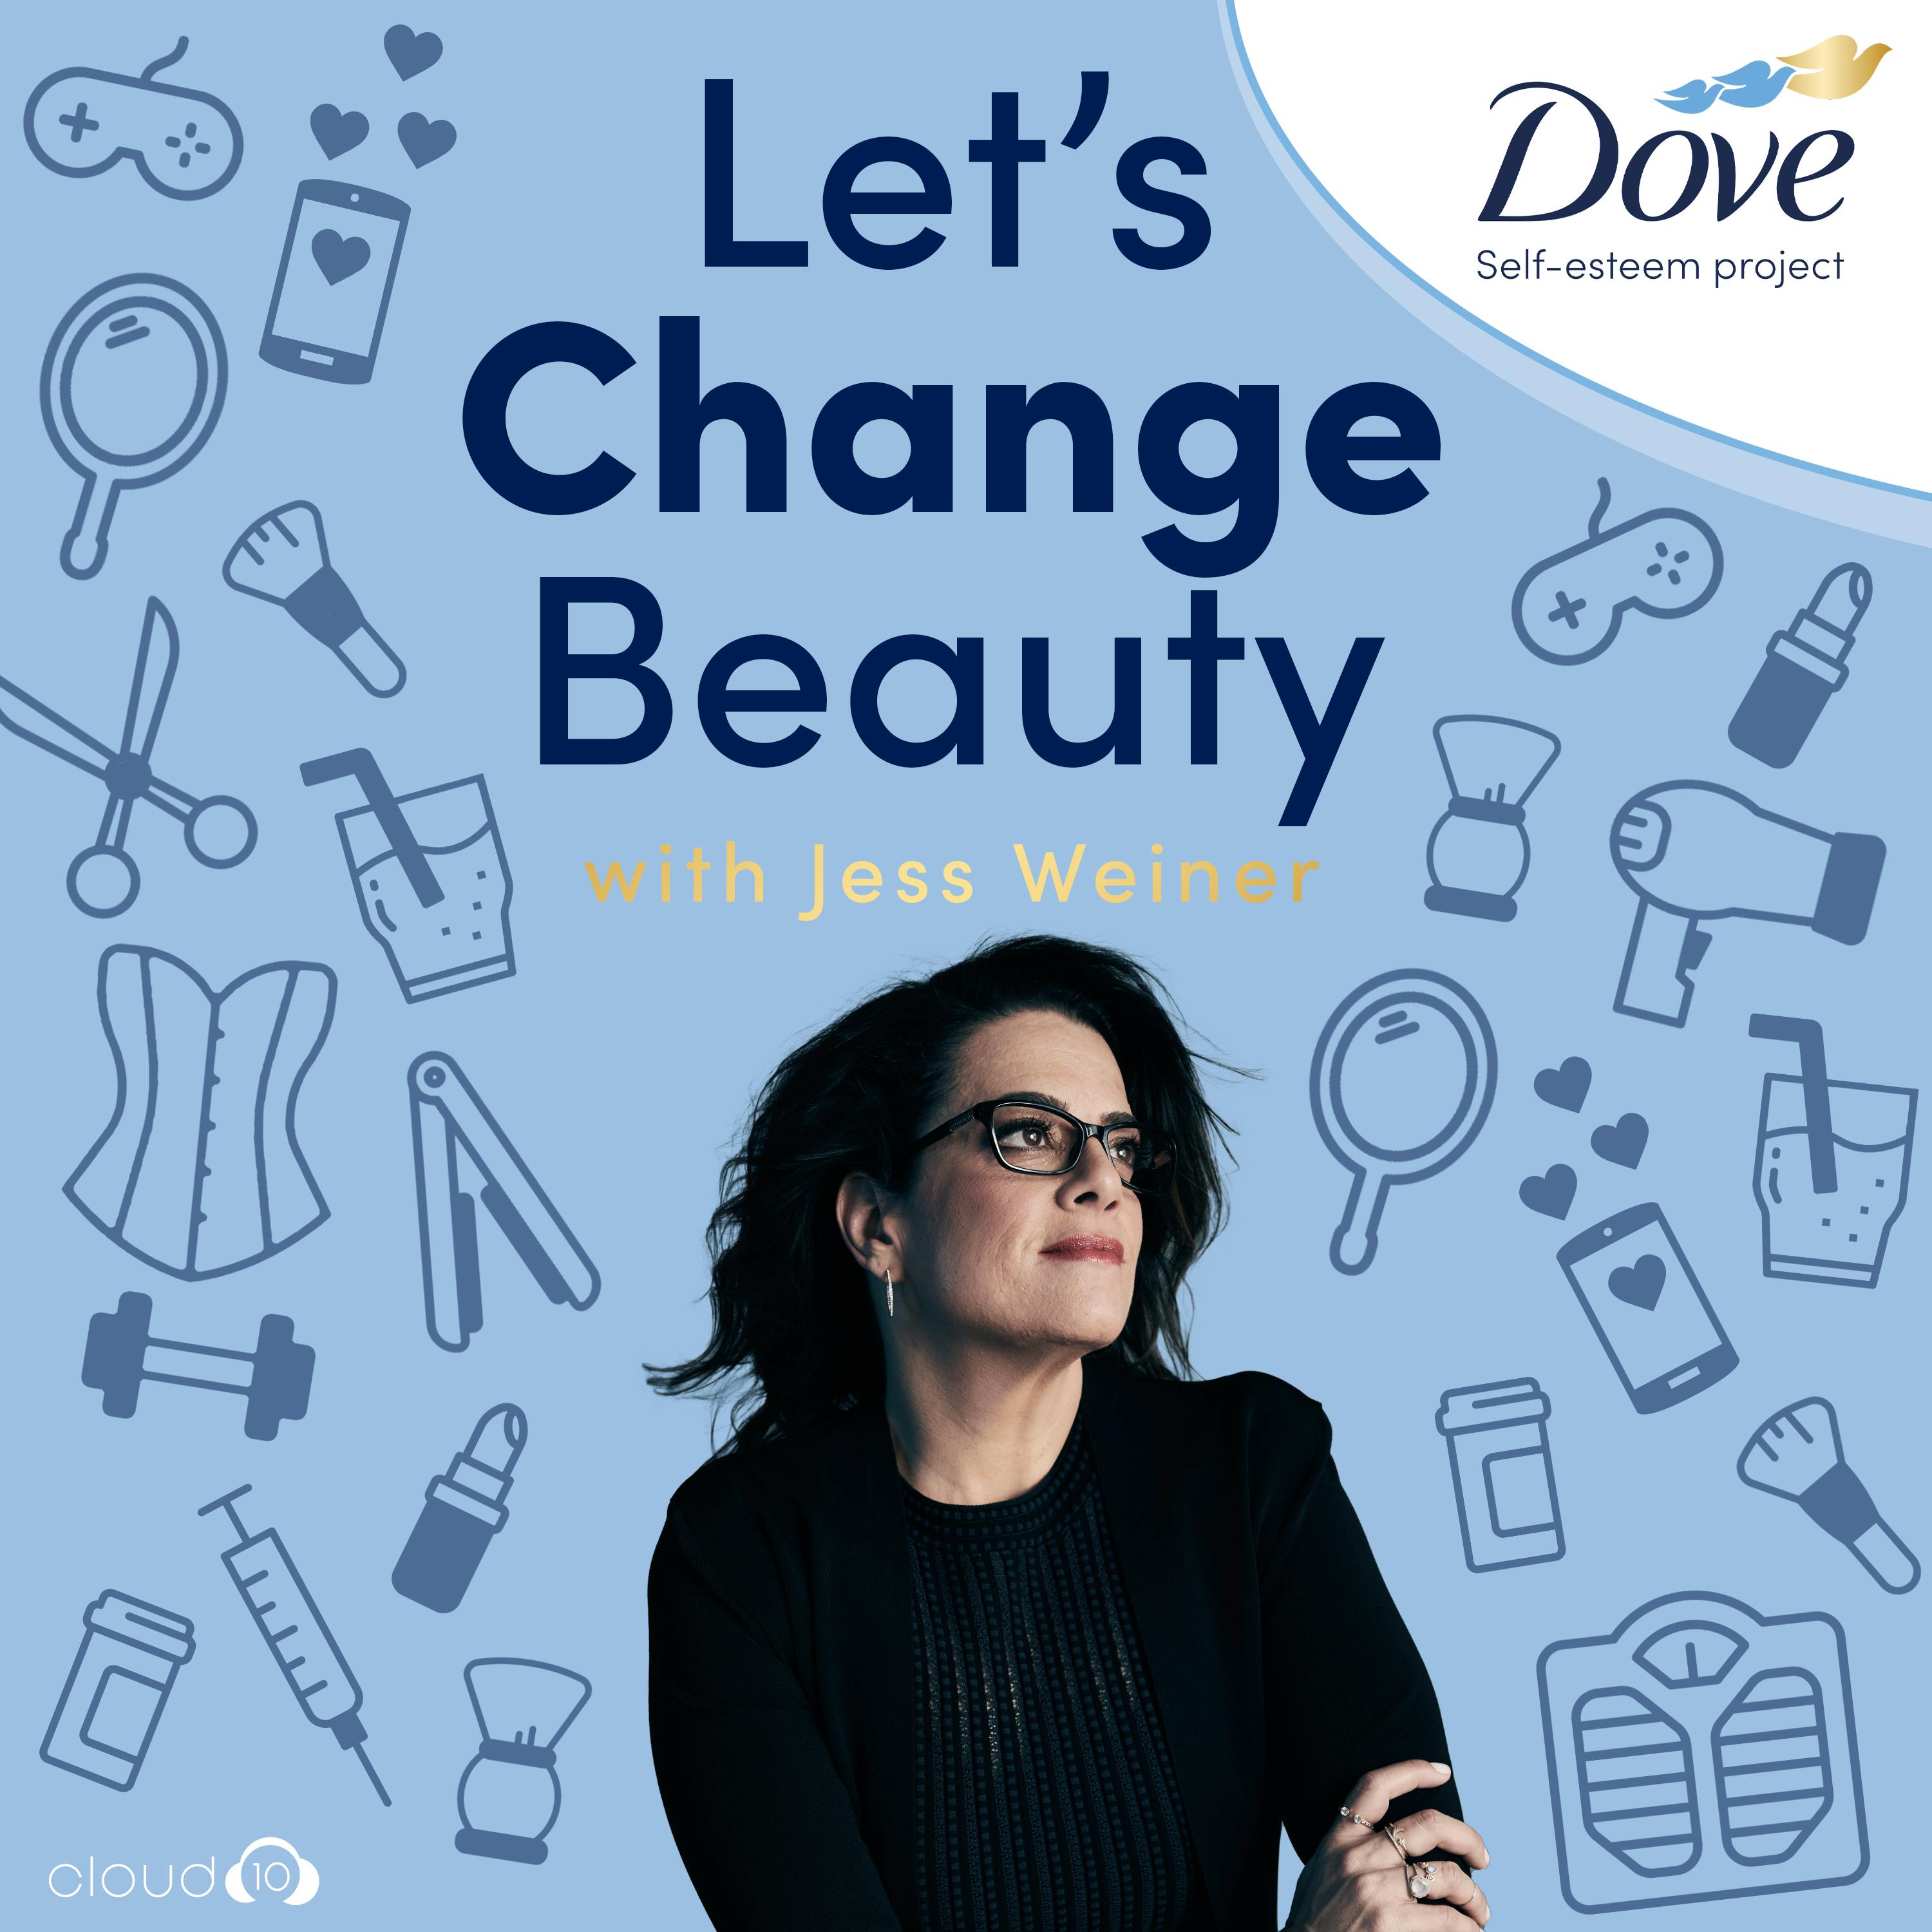 Introducing: Let's Change Beauty with Jess Weiner